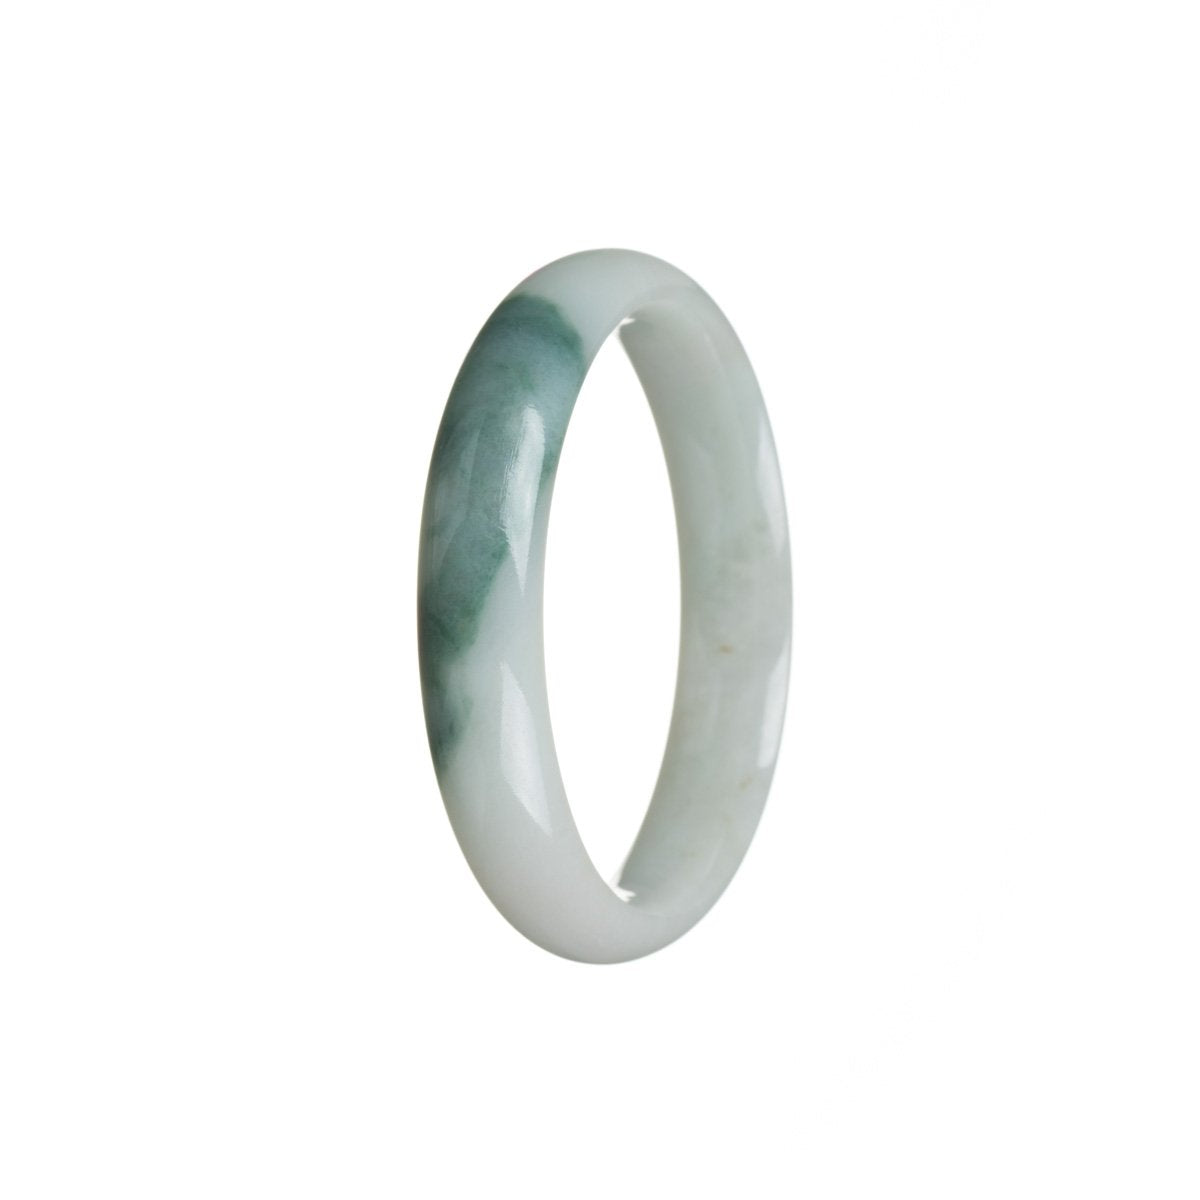 A stunning white flower Burma Jade bangle bracelet with a 52mm half moon shape. Perfect for adding an elegant touch to any outfit.